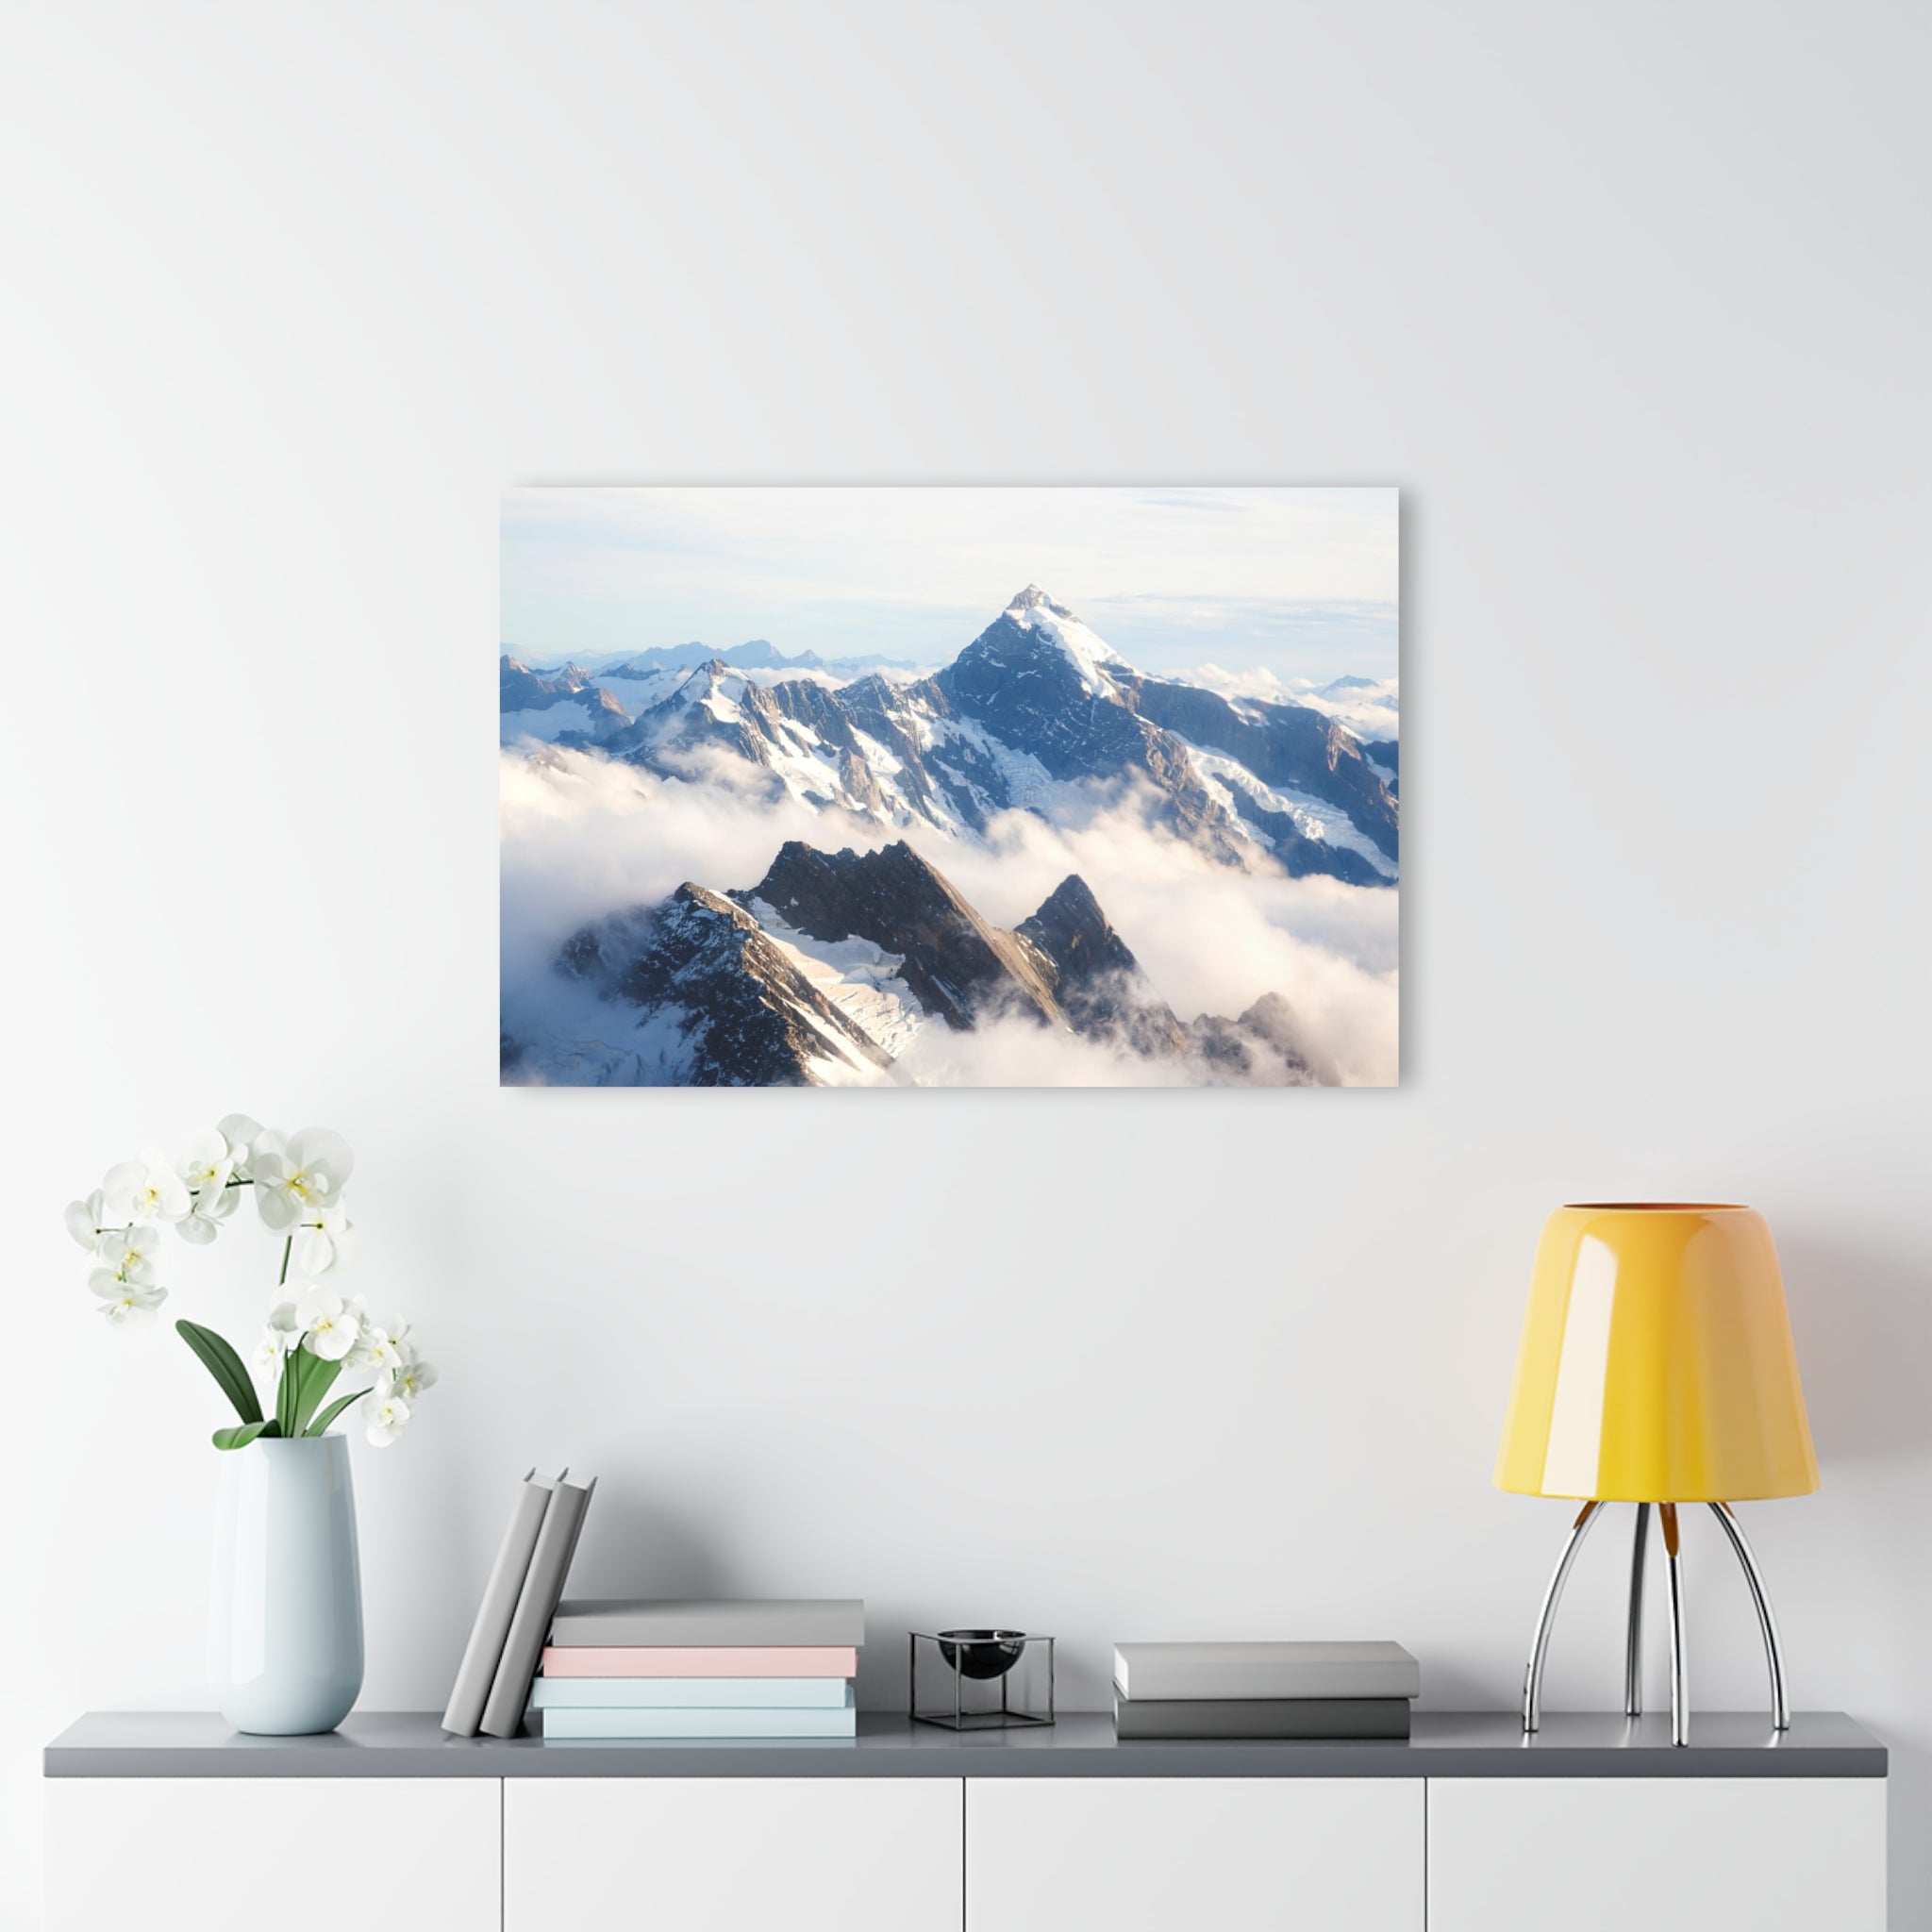 Mountain Peak Acrylic Print (French Cleat Hanging)